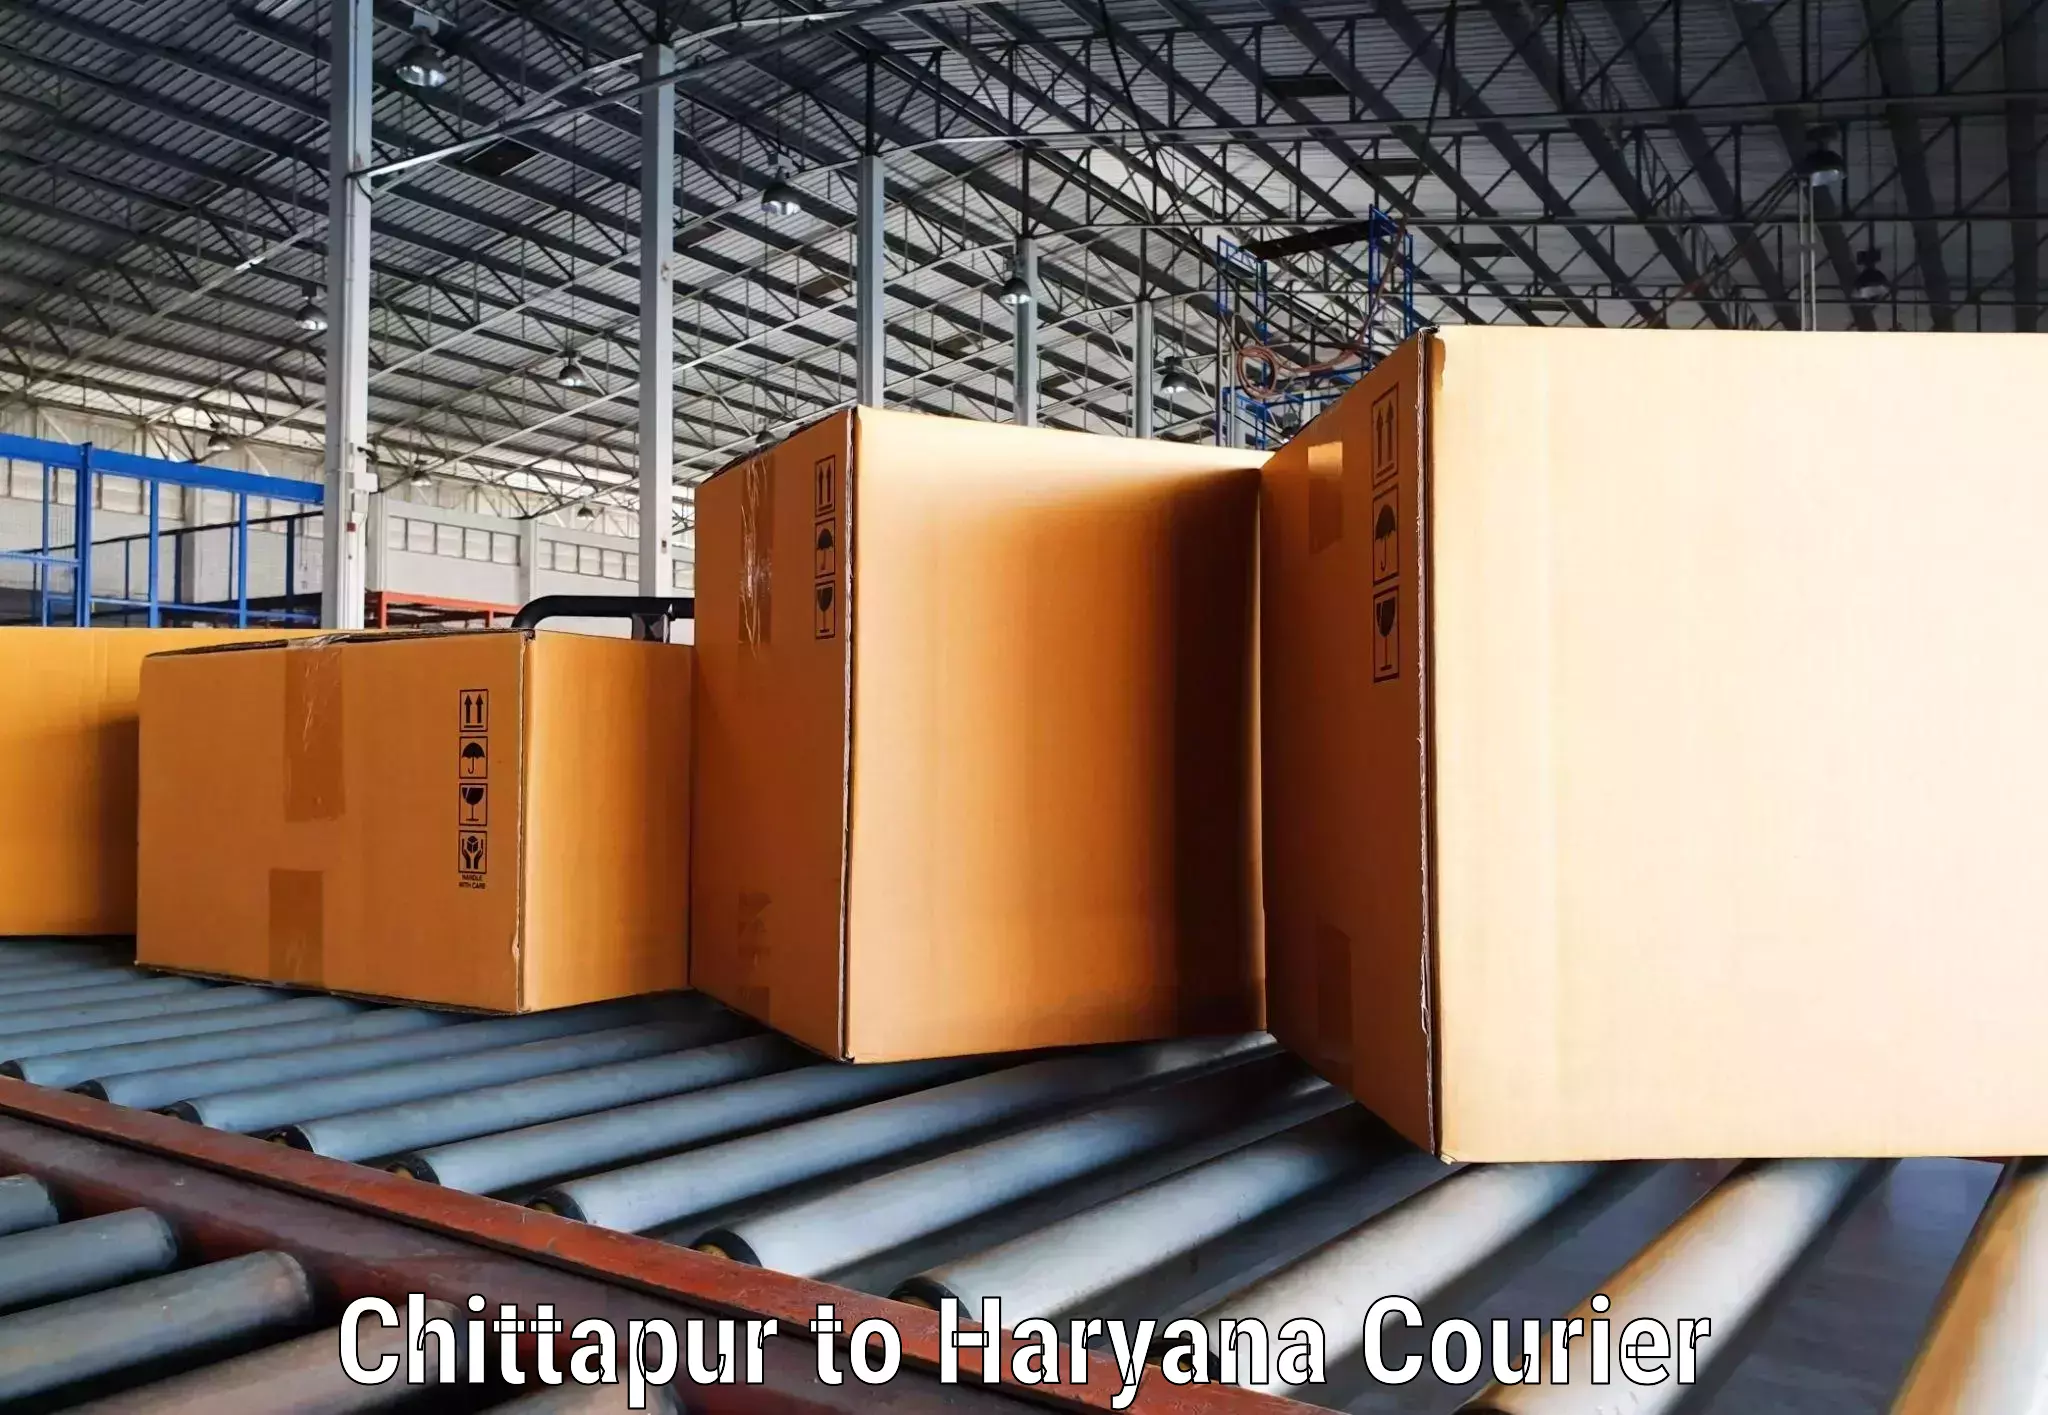 Express delivery capabilities Chittapur to Hansi